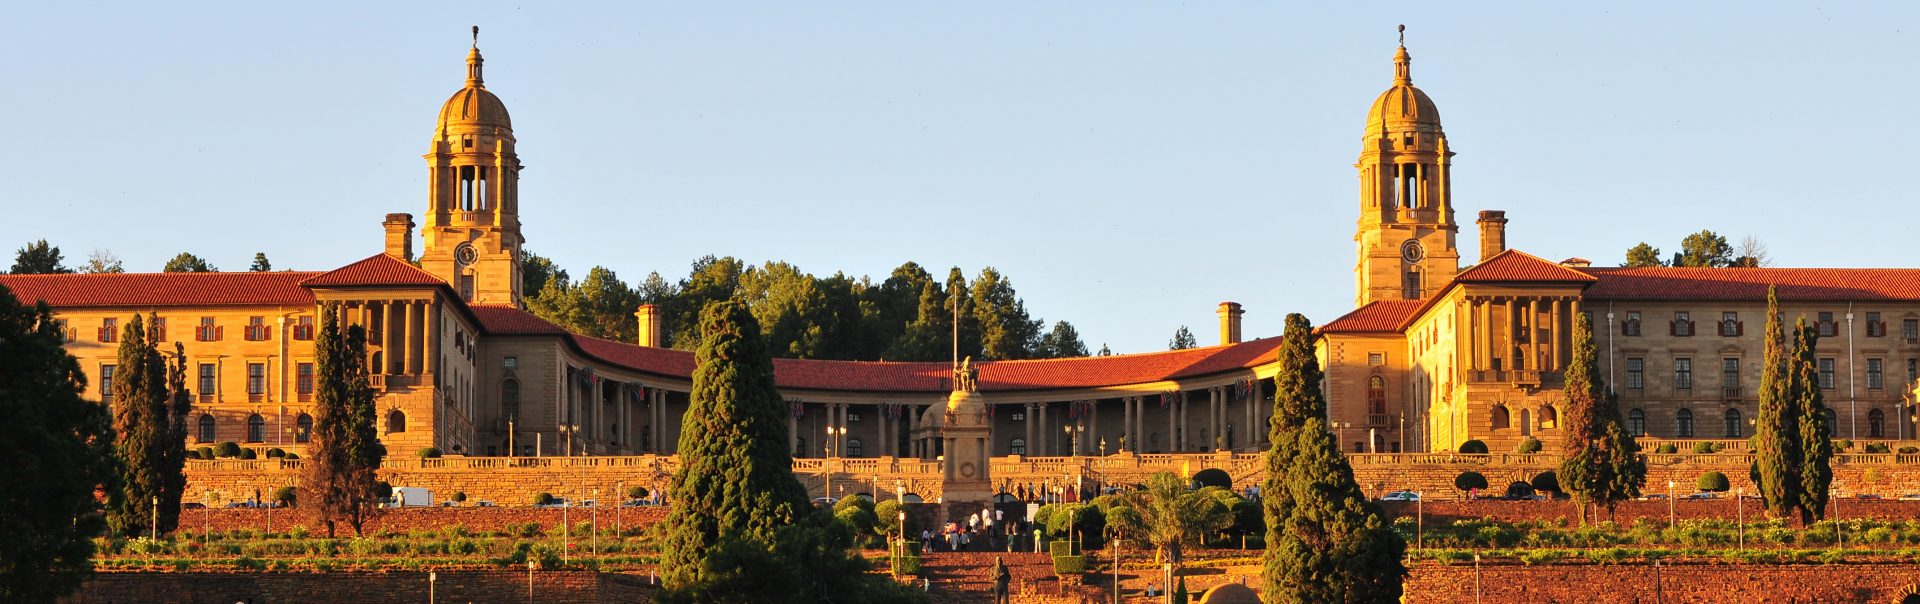 "South African Union Buildings seen here at sundown. The Union Buildings were built from light sandstone and designed by the Sir Herbert Baker in the English monumental style. The Buildings are over 275 m long and a semi-circular shape, with the two wings at the sides that represent the union of a formerly divided people. (English and Afrikaans). The Union Buildings are considered by many to be the architect's greatest achievement and a South African architectural masterpiece. The cornerstone was laid in November 1910. Requiring over 1,265 workers over 3 years to build, the structure was completed in 1913. Today, the official seat of the South African government and also the offices of the President of South Africa."